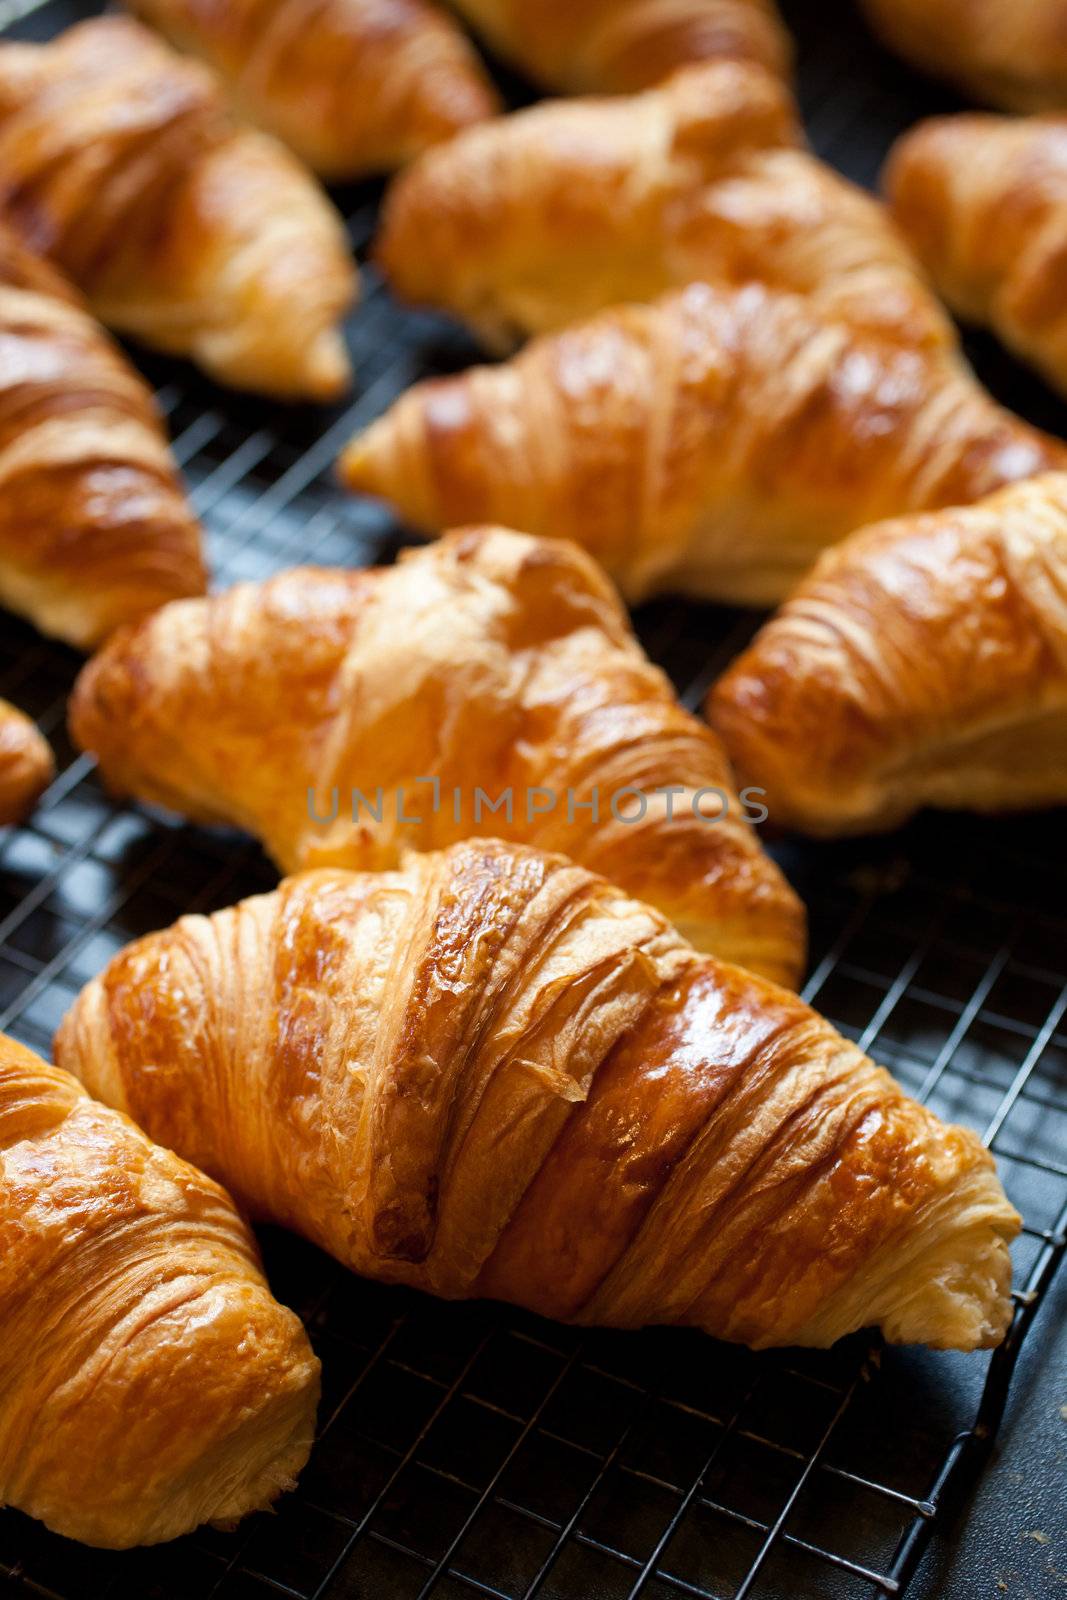 Delicious fresh croissants just out of the oven